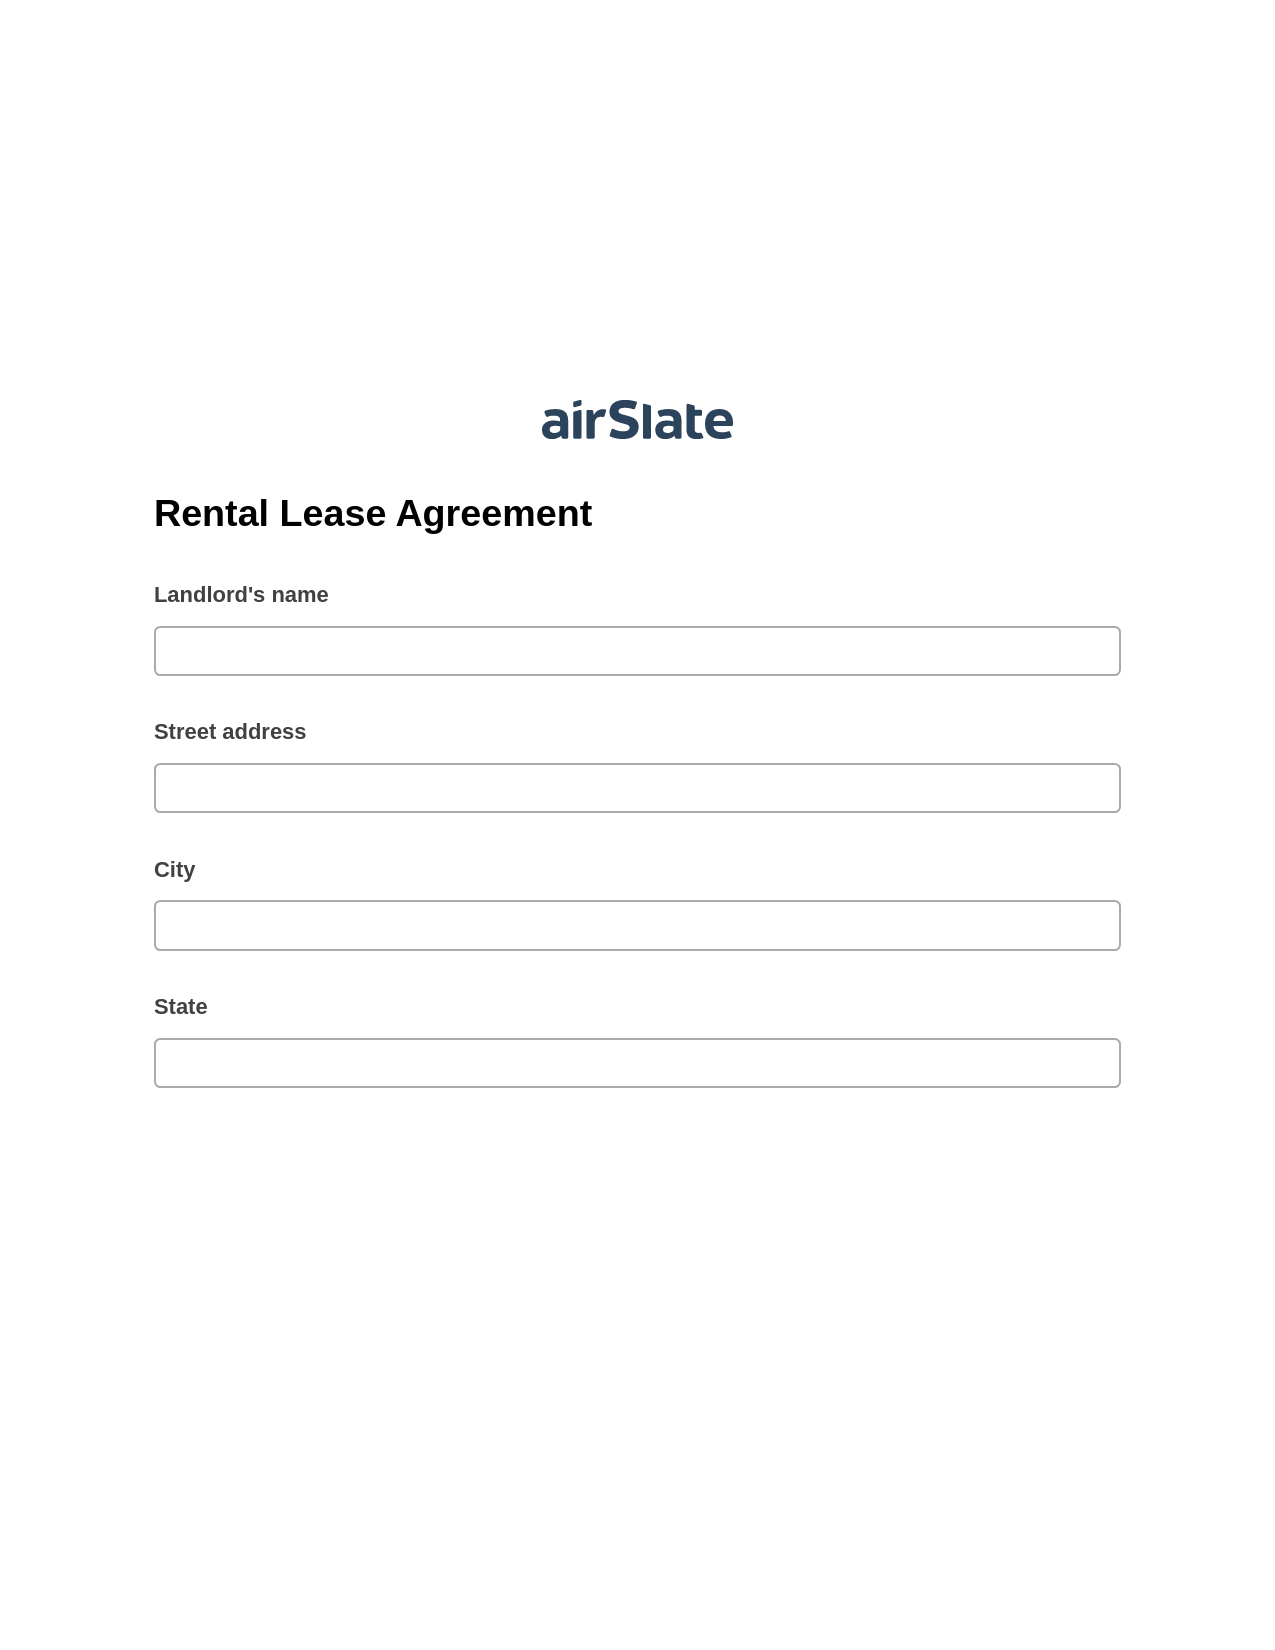 Rental Lease Agreement Pre-fill from Google Sheets Bot, Invoke Salesforce Process Bot, Export to Formstack Documents Bot